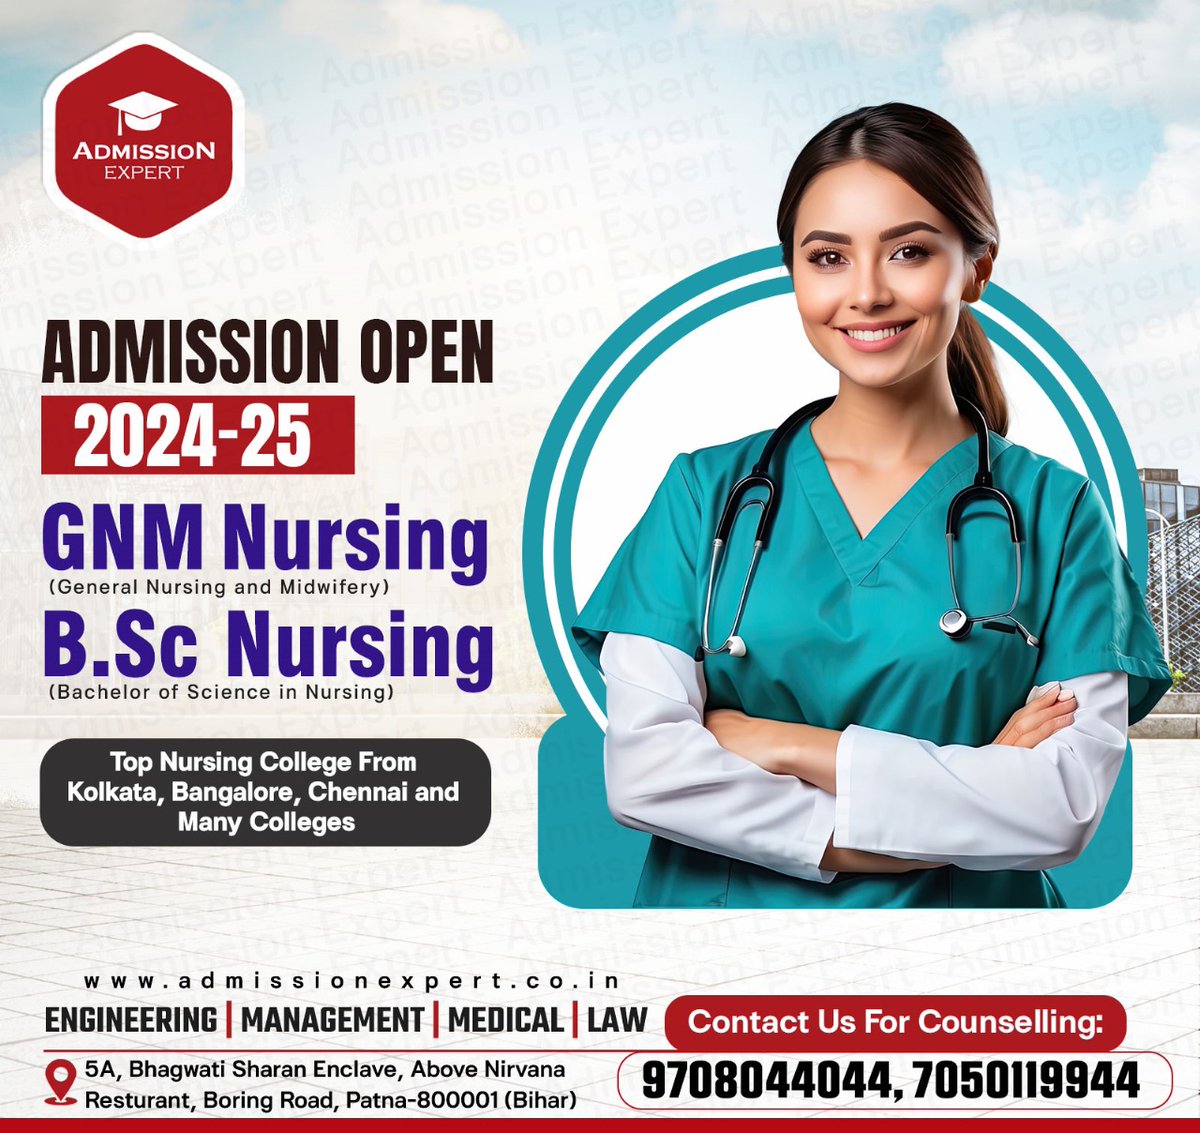 📢 Exciting news for aspiring nurses! Admission Expert  is thrilled to announce that admissions are now open for the 2024-25 academic year for GNM Nursing and B.Sc Nursing programs!
#AdmisionExpert #NursingAdmissions #AdmissionOpen #NursingCareer #Admission2024